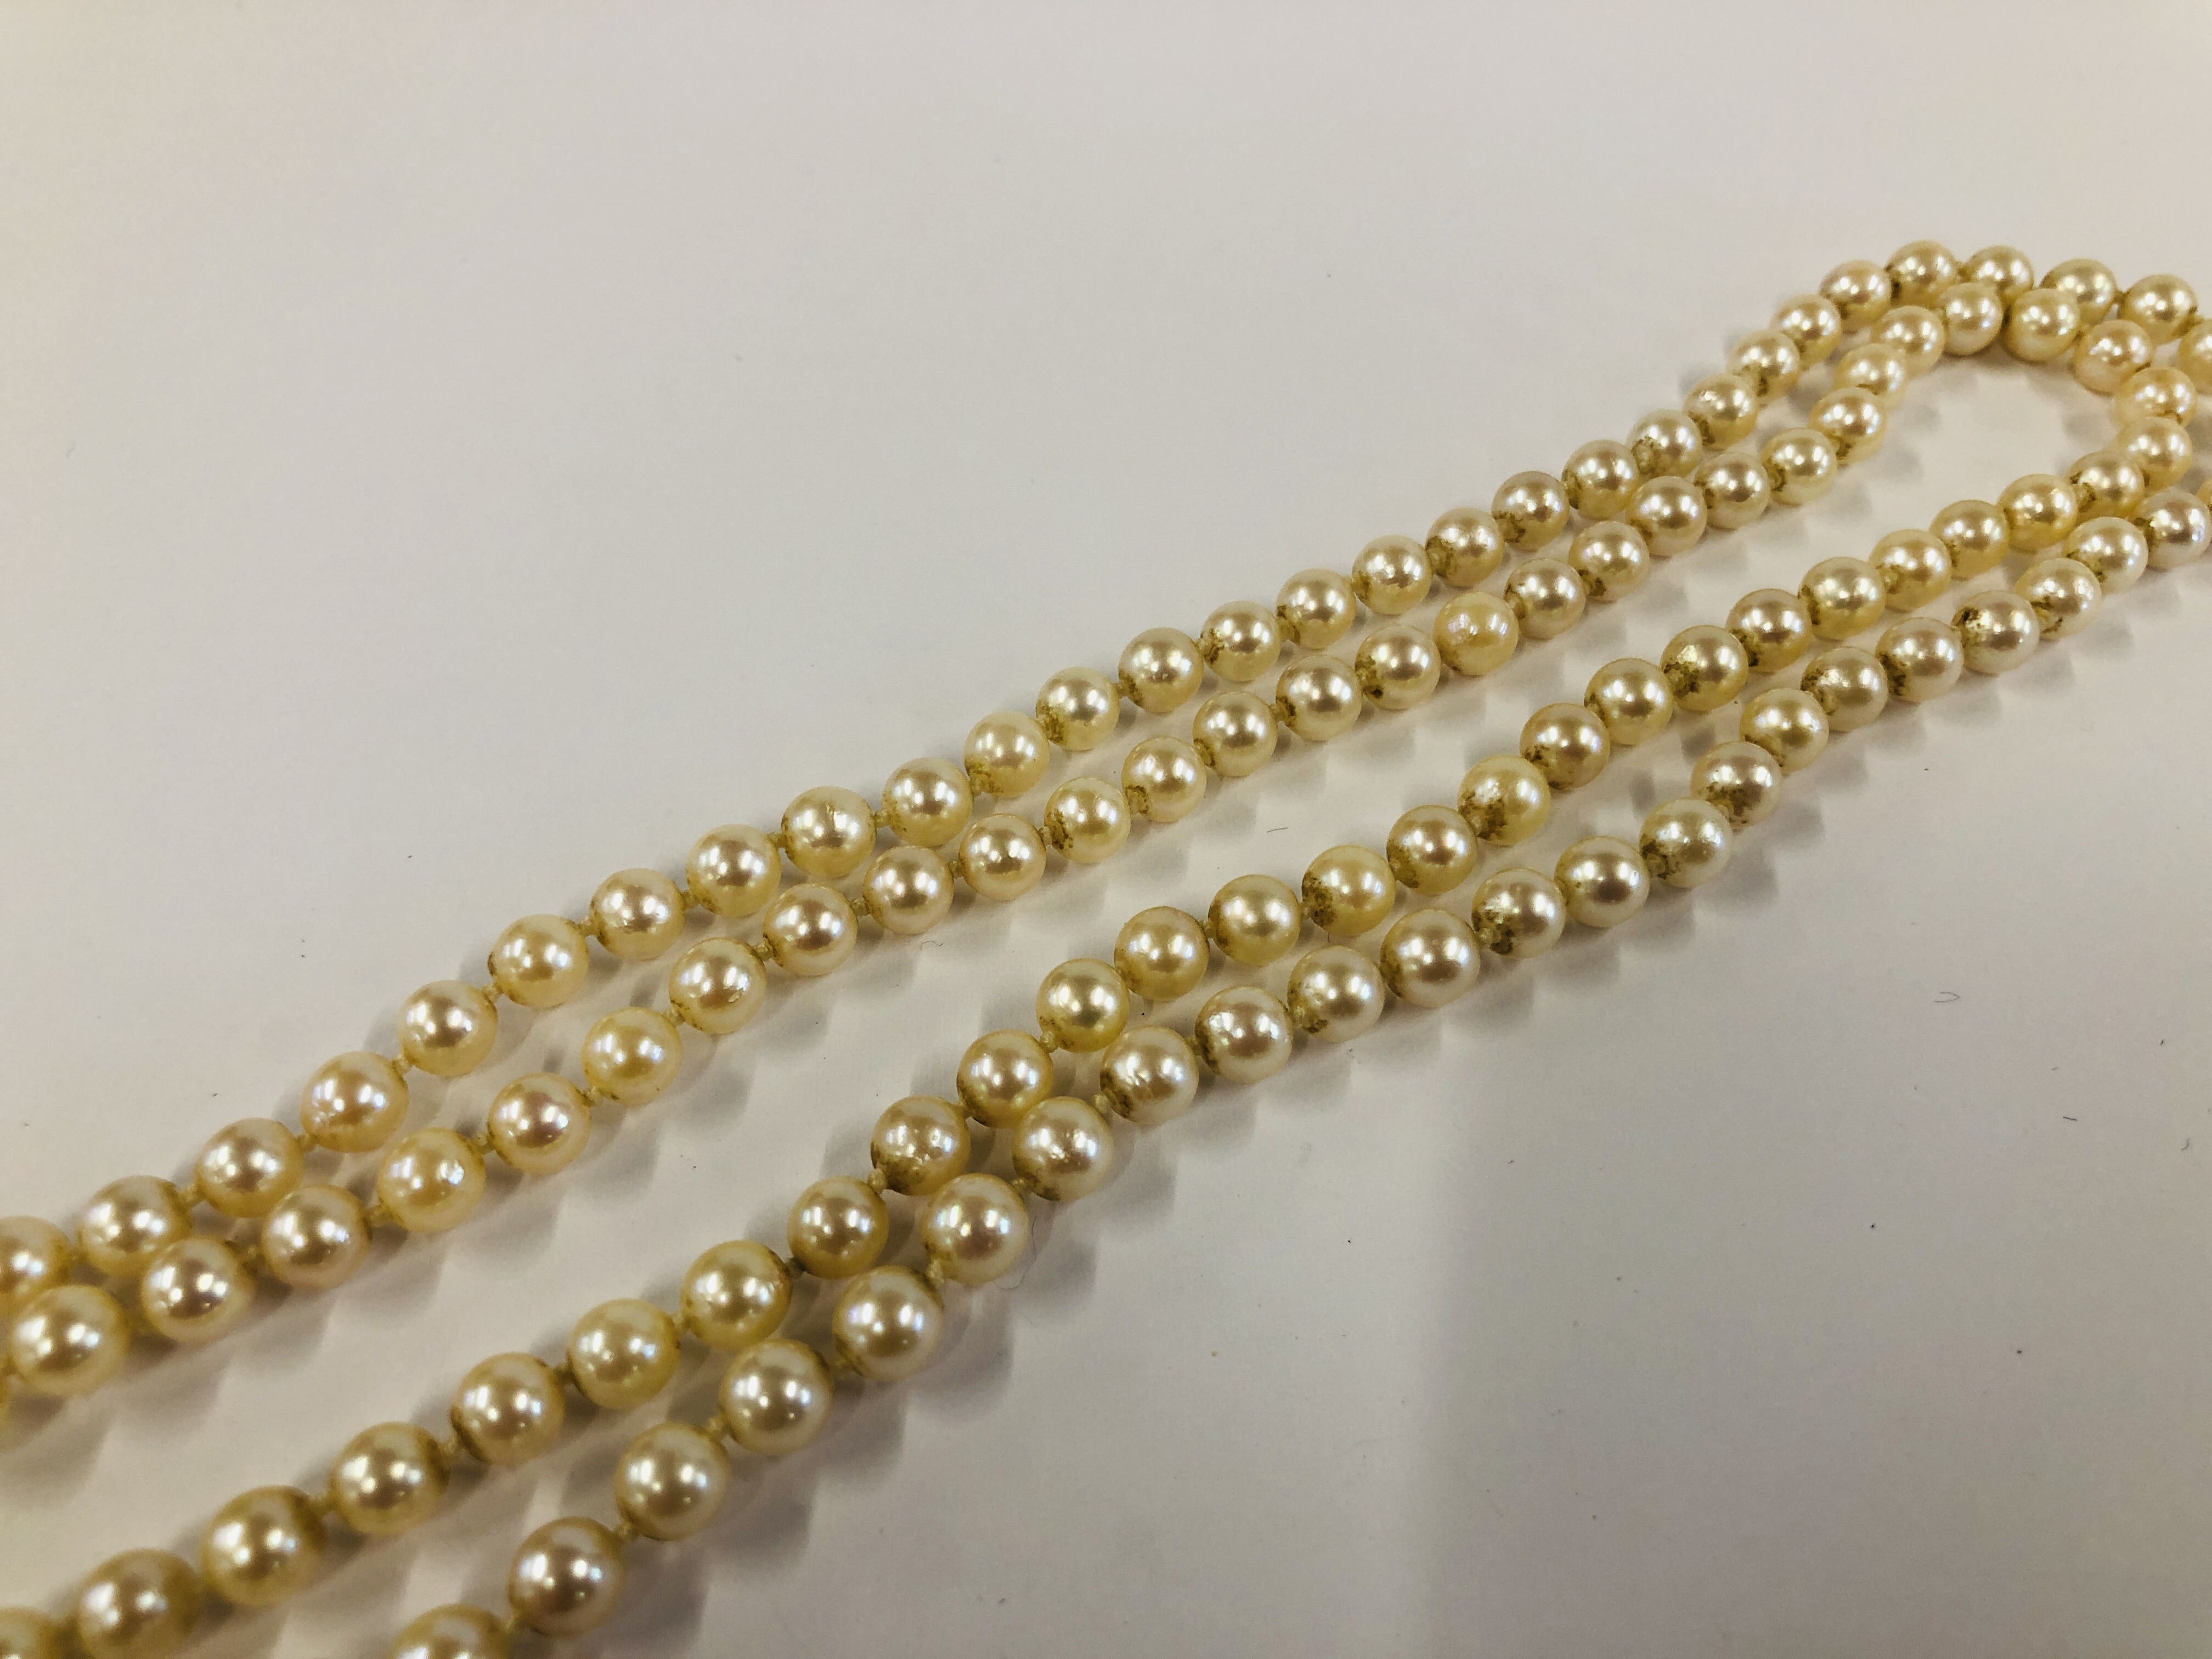 A VINTAGE DOUBLE ROW PEARL NECKLACE BY "MIKIMOTO" ALONG WITH AN ORIGINAL VINTAGE MIKIMOTO SILK - Image 5 of 10